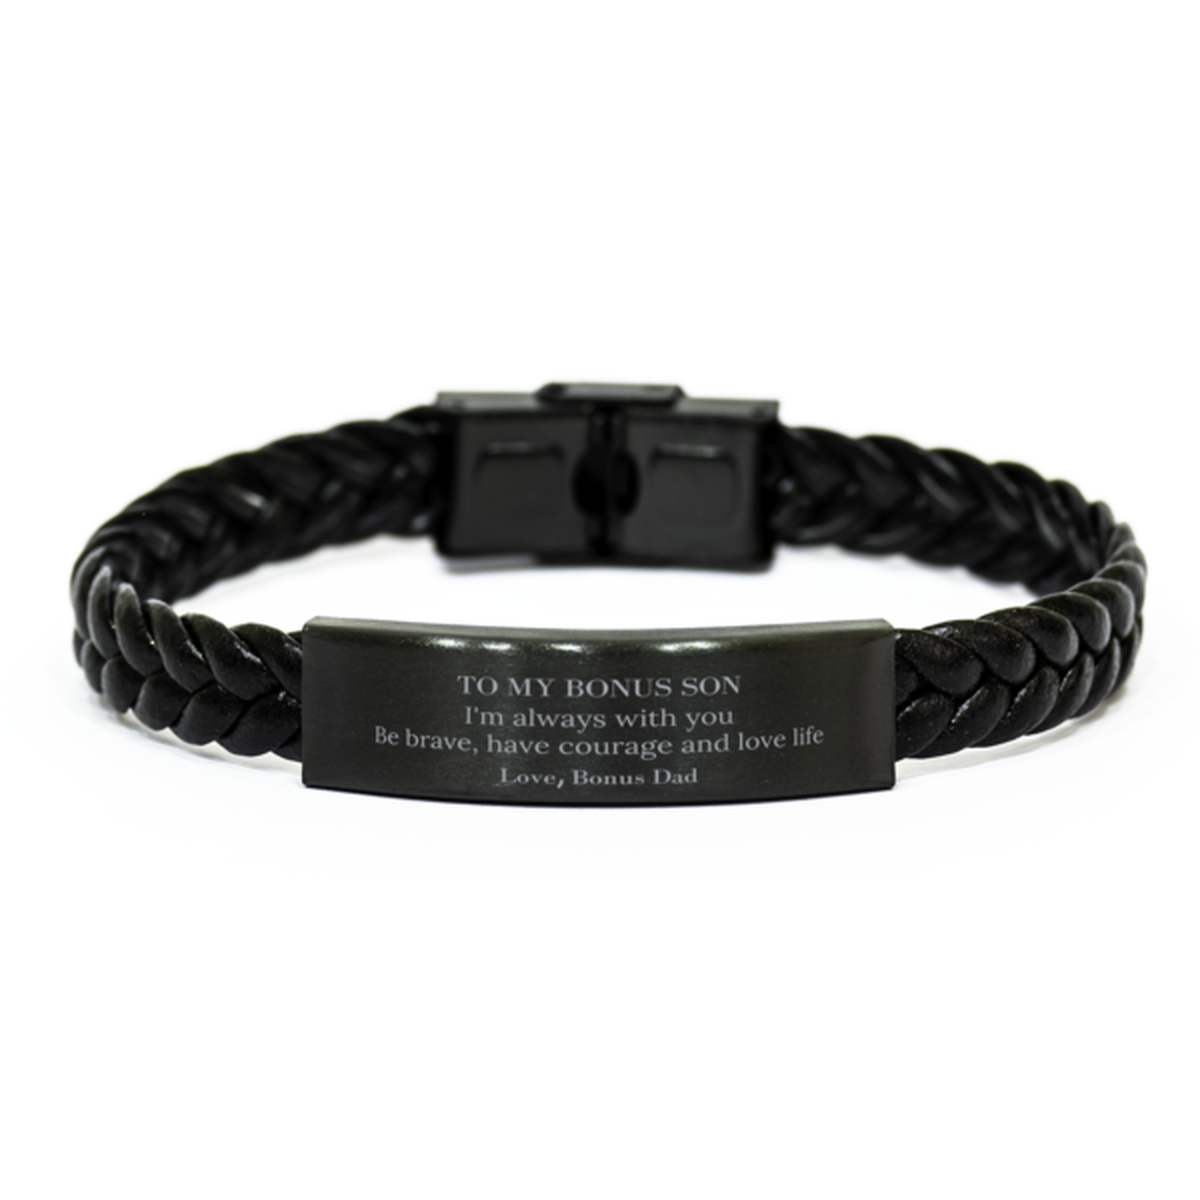 To My Bonus Son Gifts from Bonus Dad, Unique Braided Leather Bracelet Inspirational Christmas Birthday Graduation Gifts for Bonus Son I'm always with you. Be brave, have courage and love life. Love, Bonus Dad